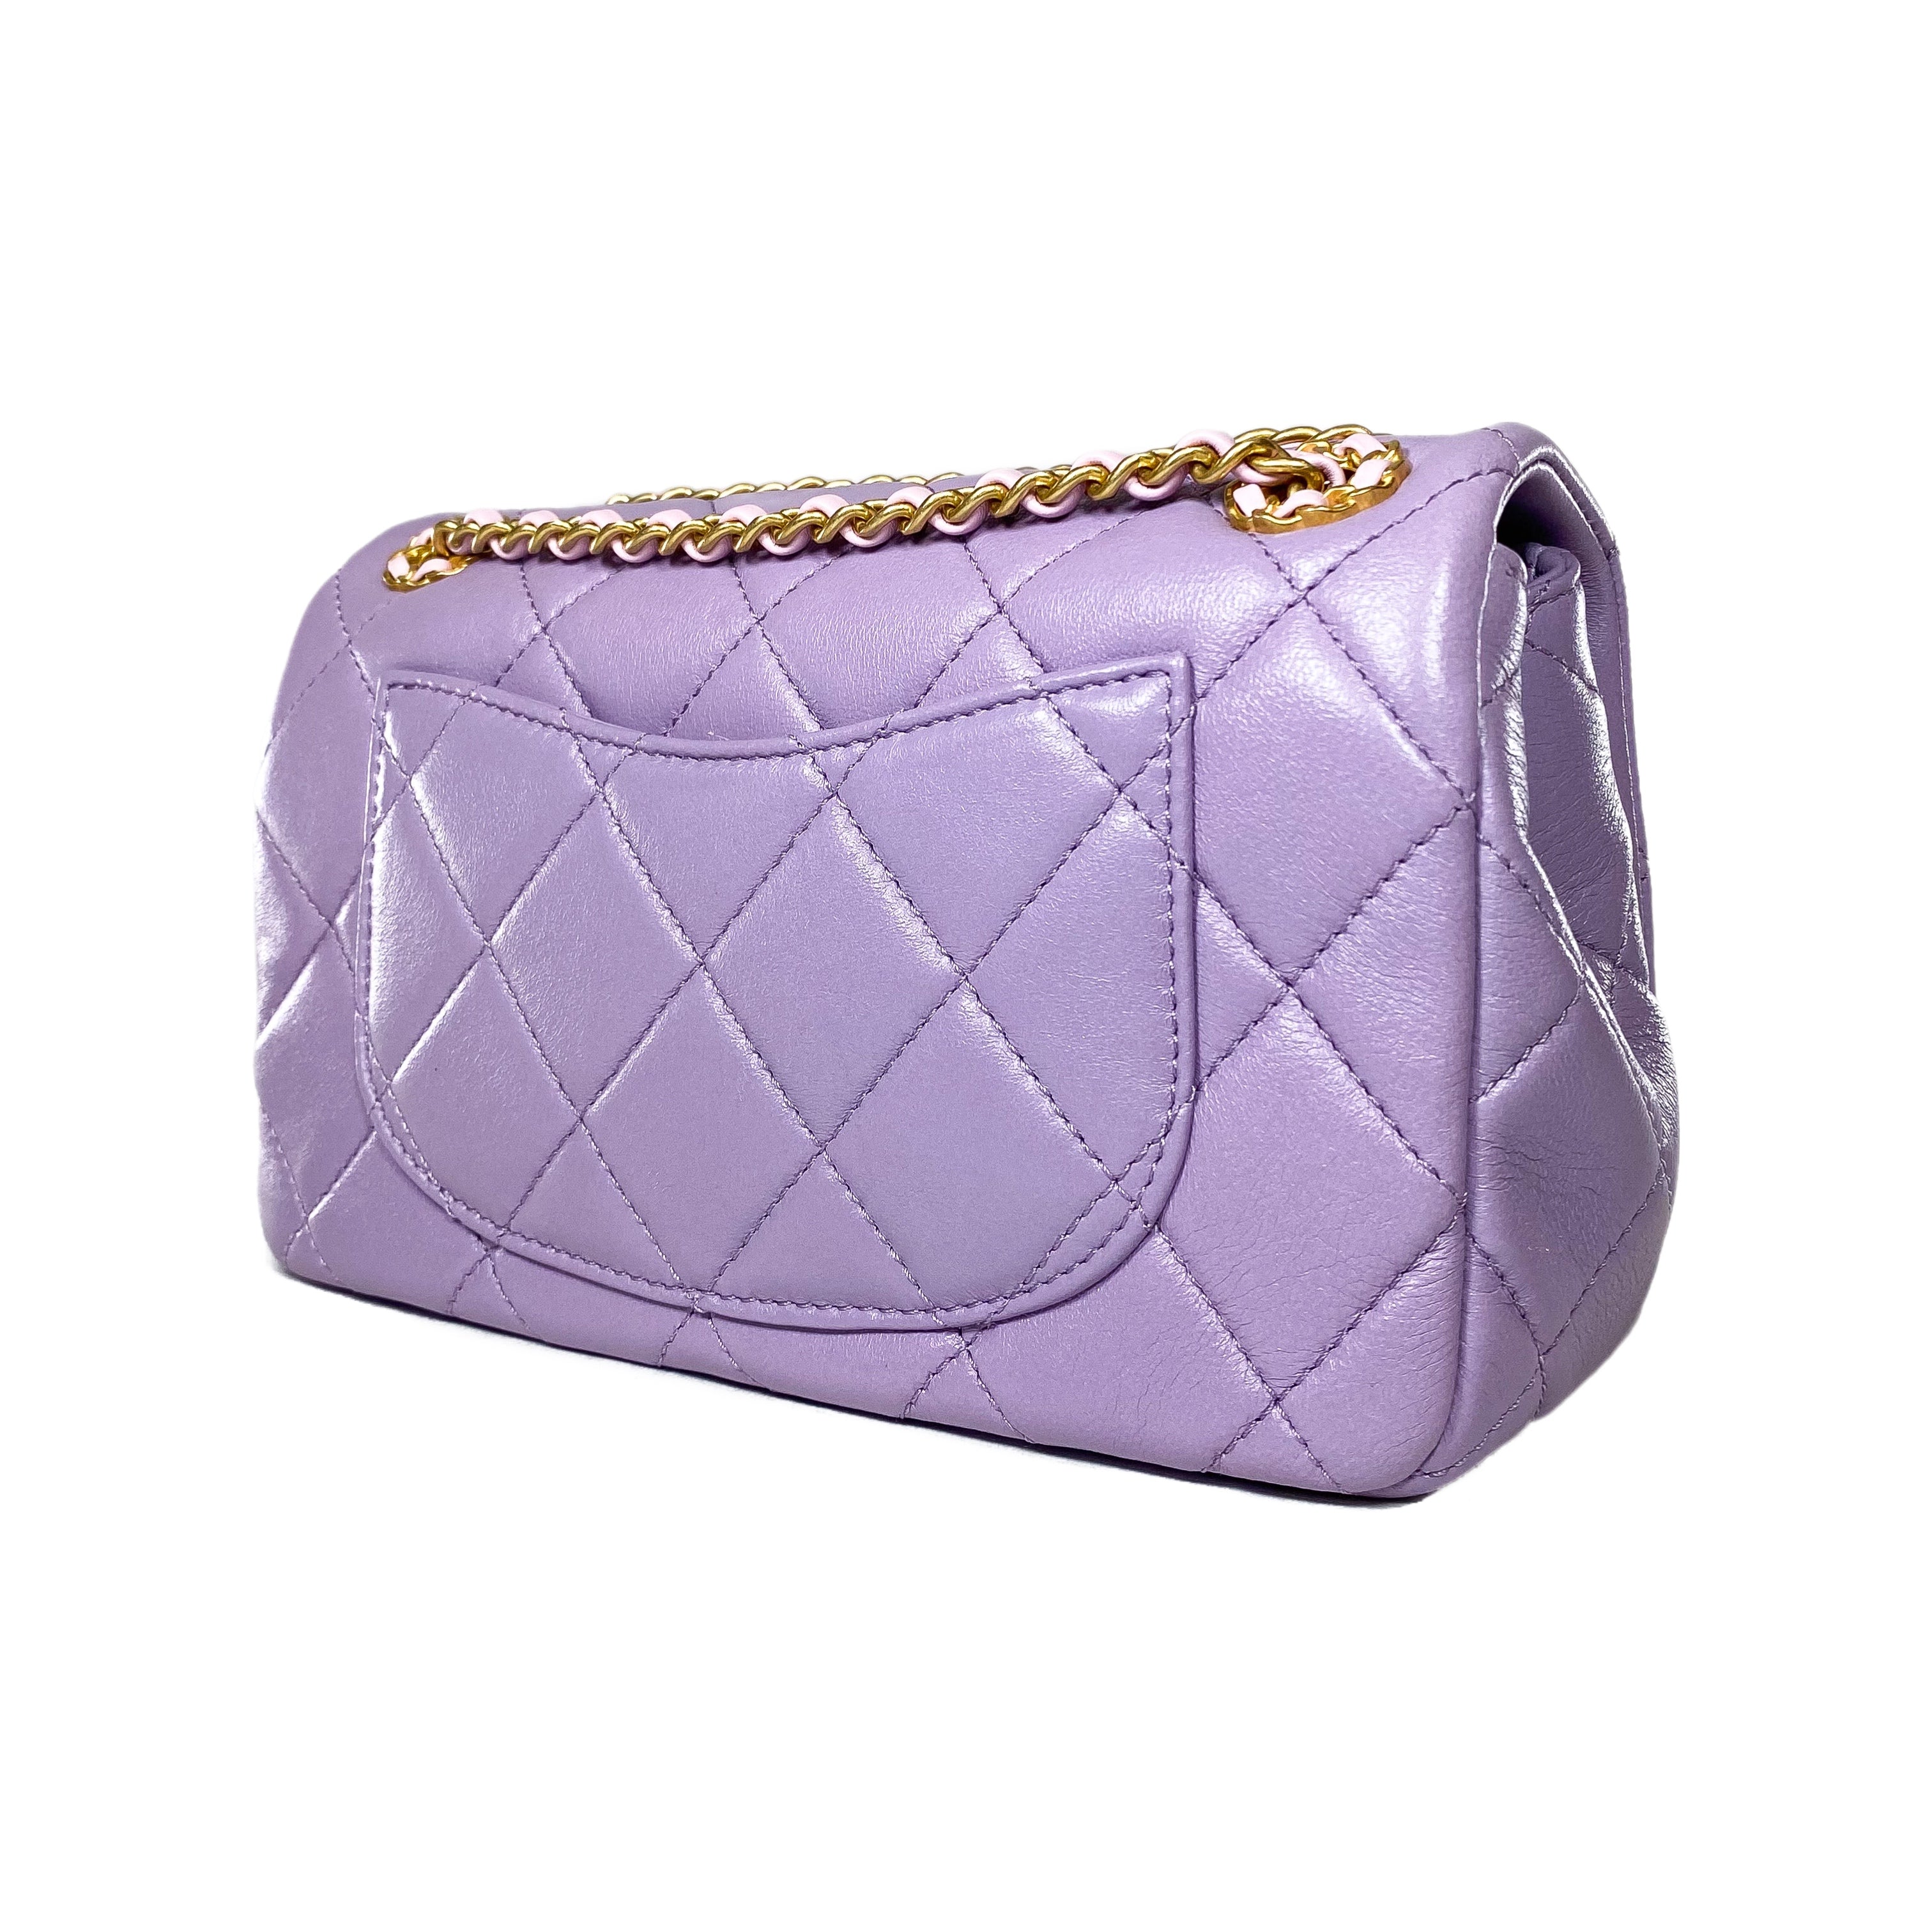 Chanel Lilac Quilted Small Flap Bag